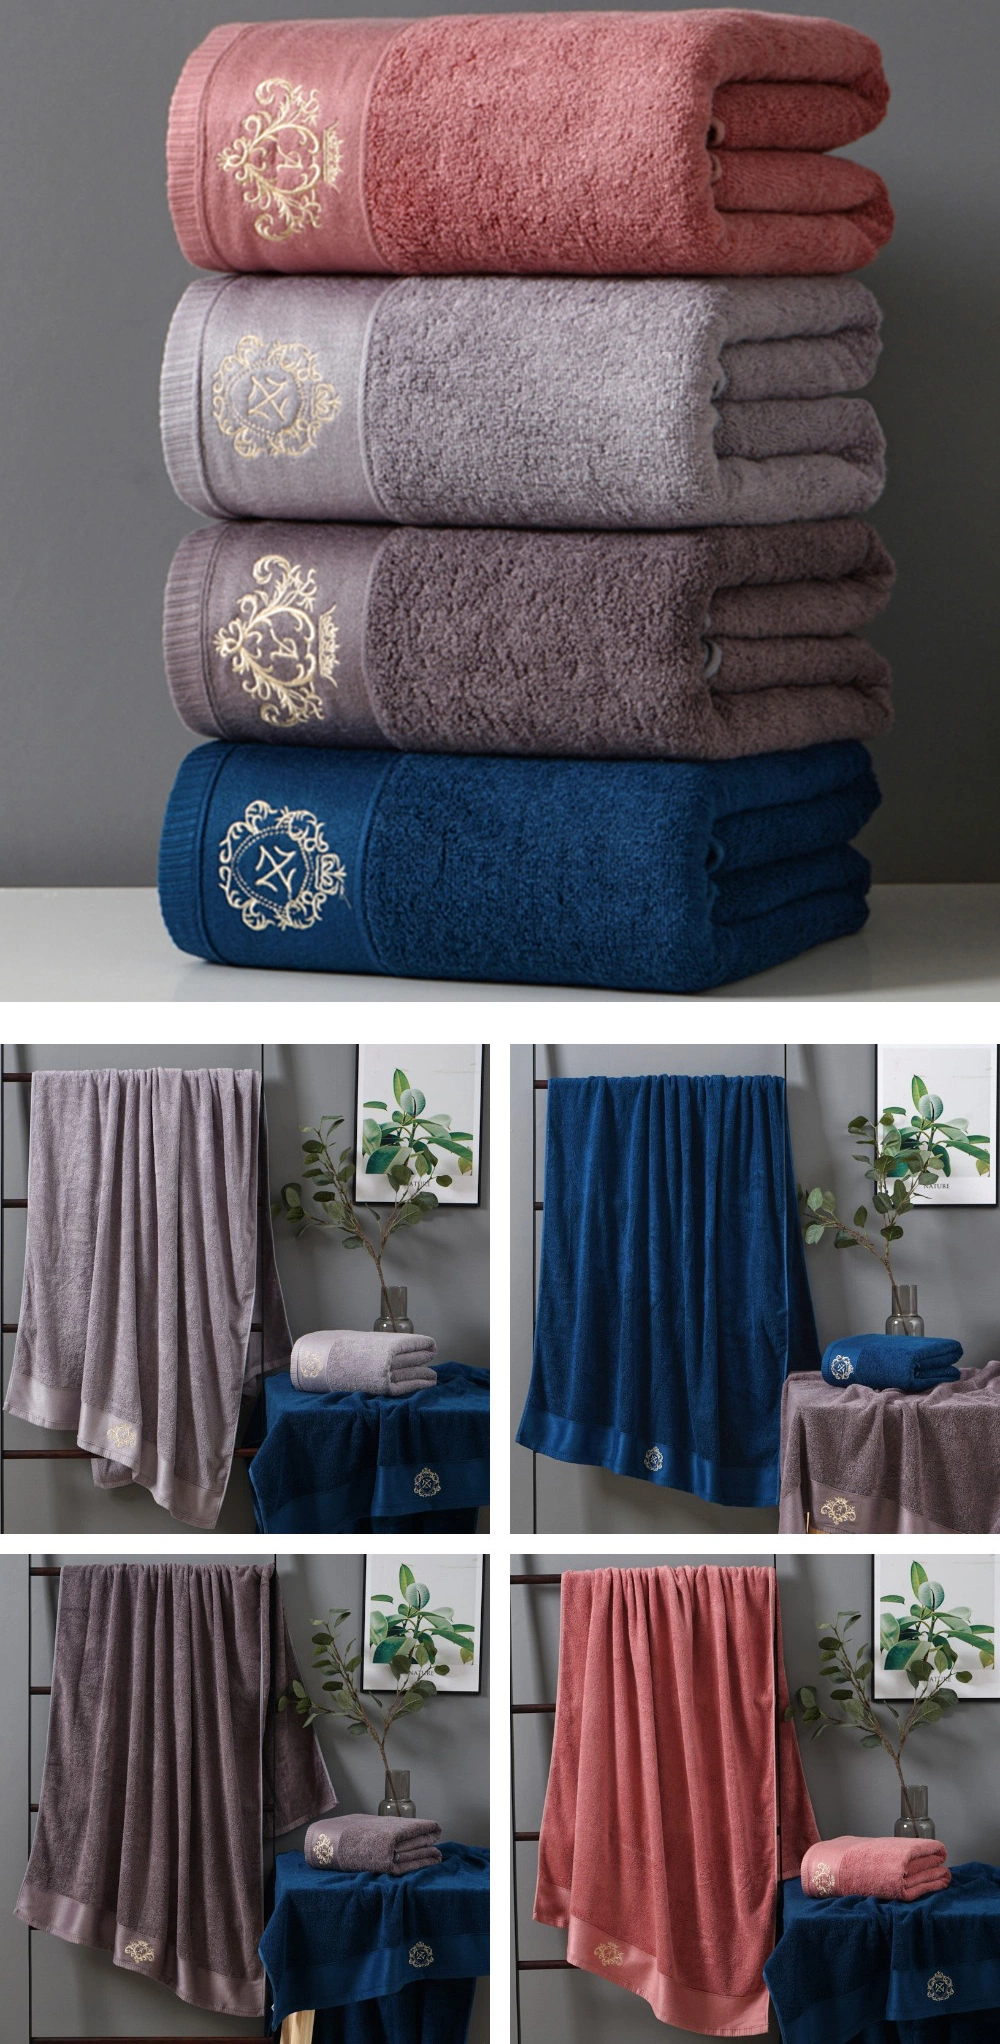 OEM/ODM 100%Cotton Household Luxury Embroidery Sport Towel Hotel SPA Quick Dry Bath Towel